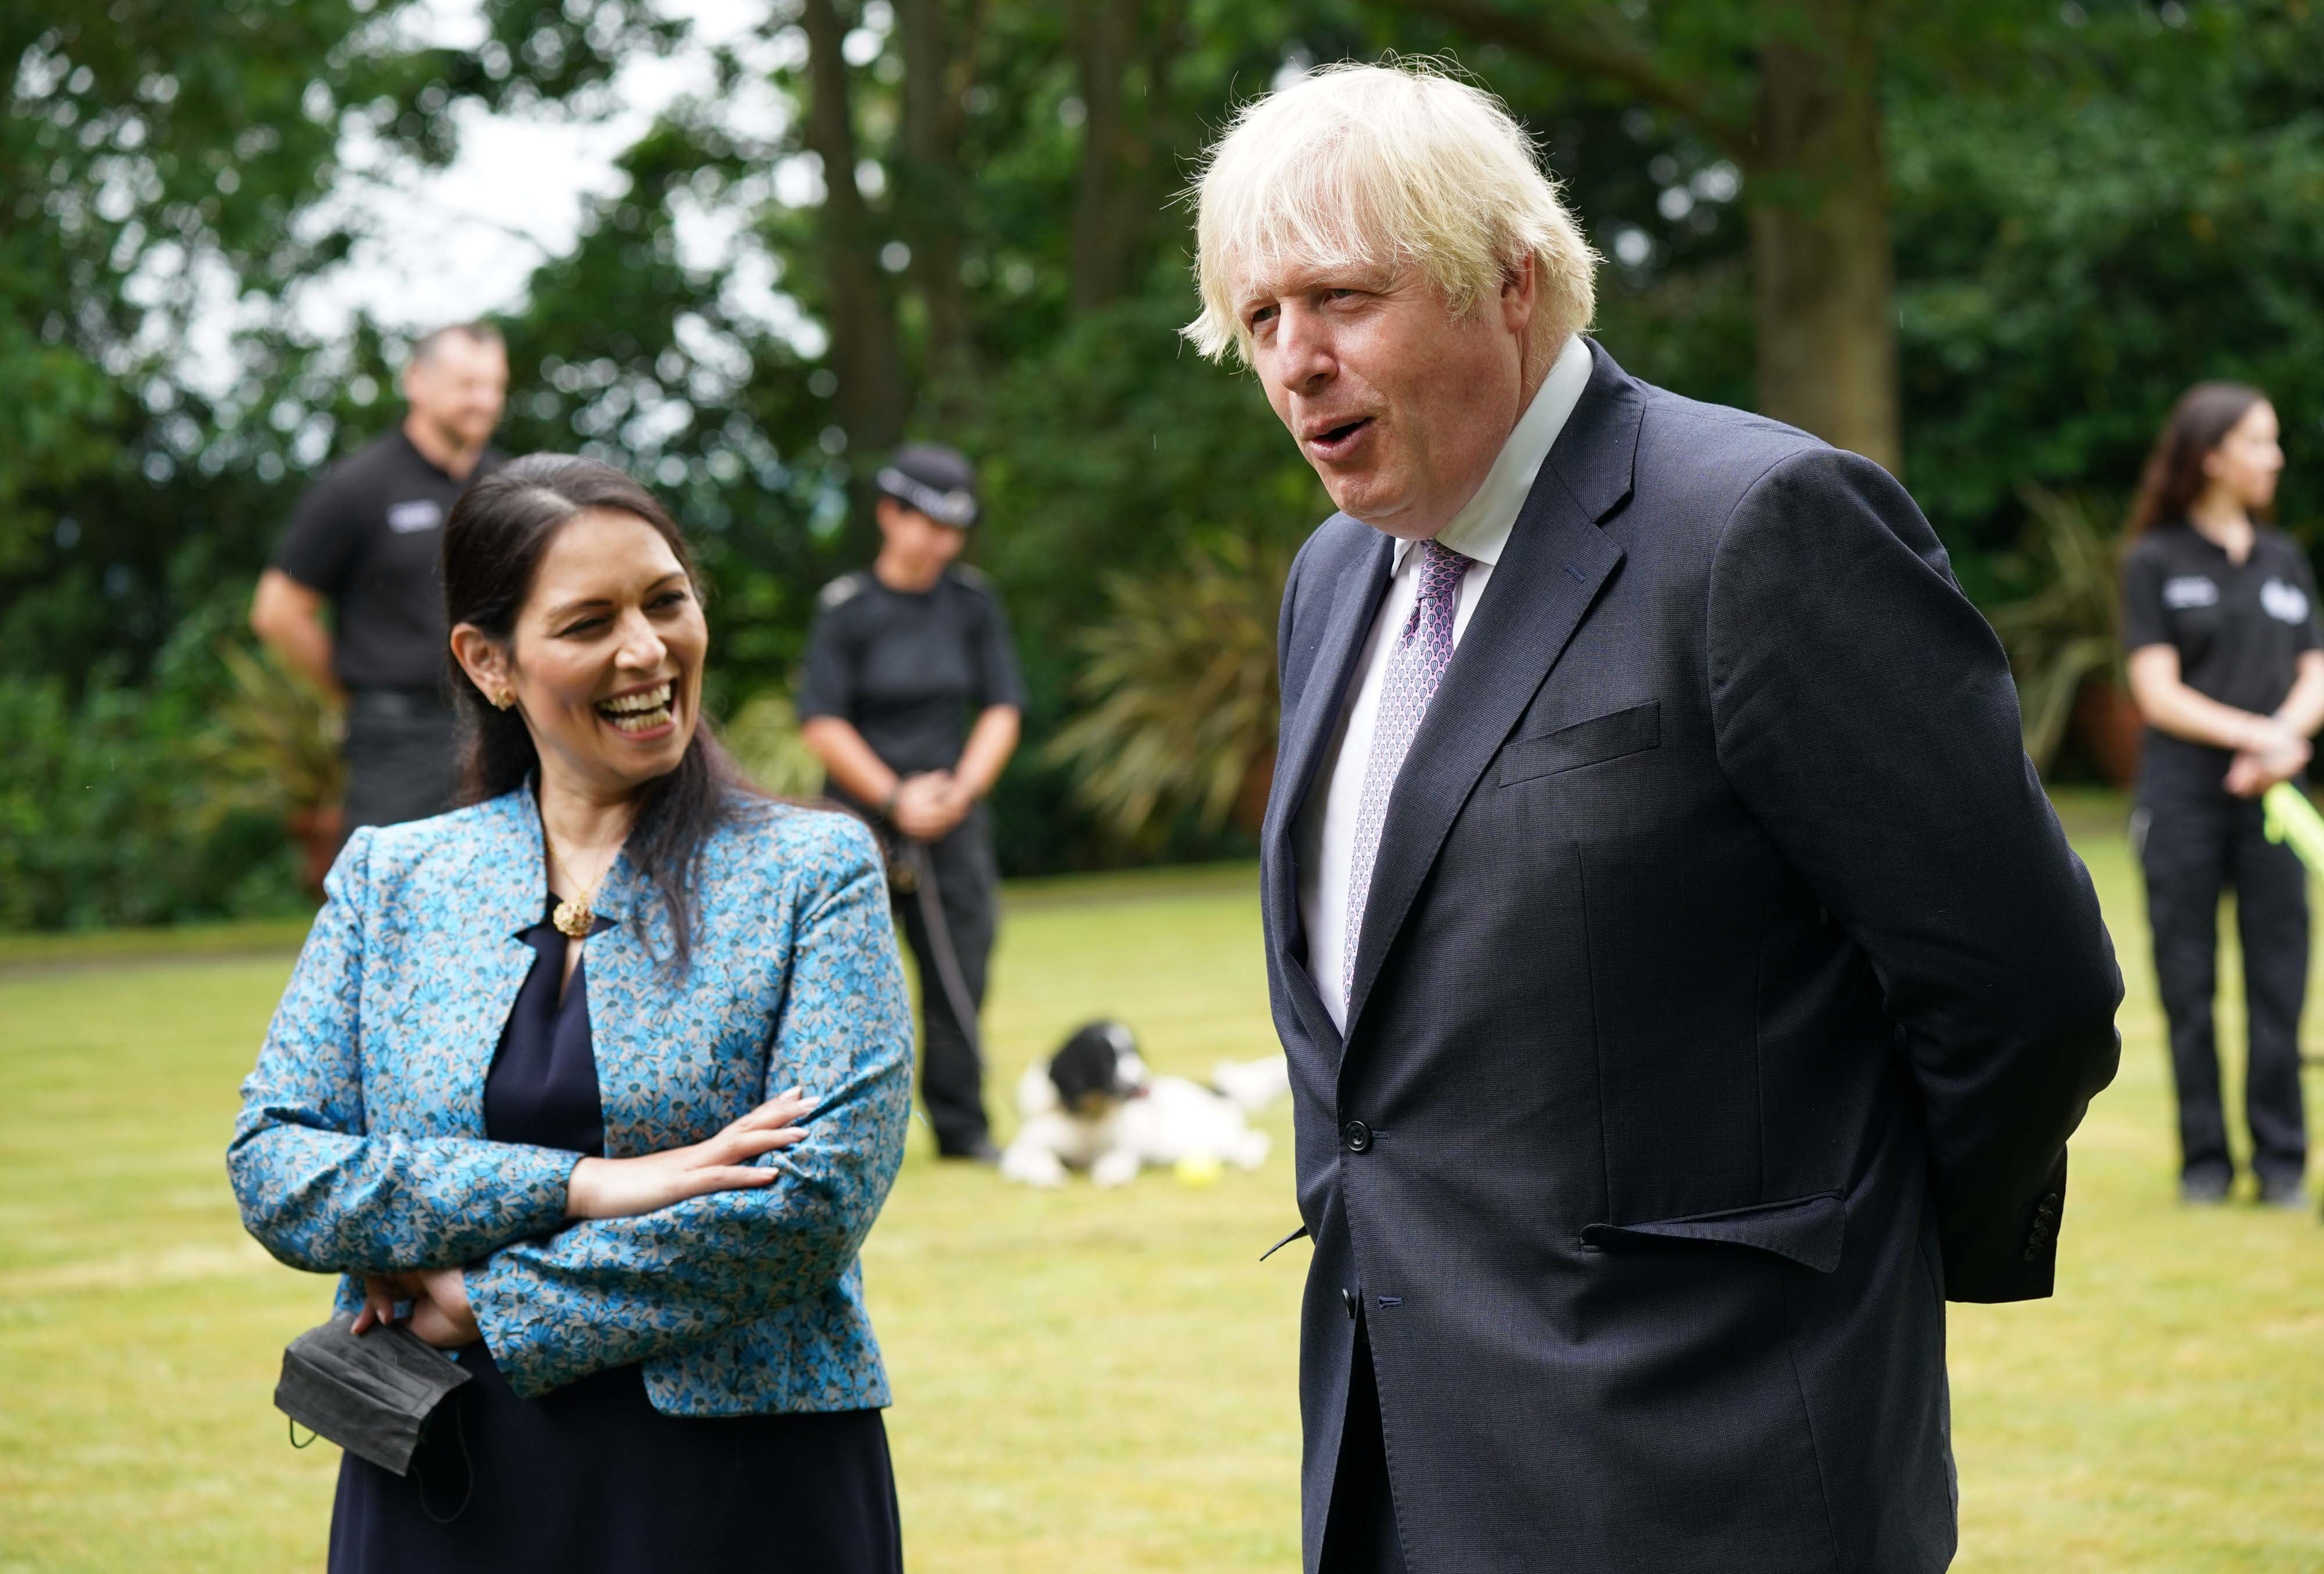 Boris Johnson and Priti Patel during a visit to Surrey Police headquarters on Tuesday